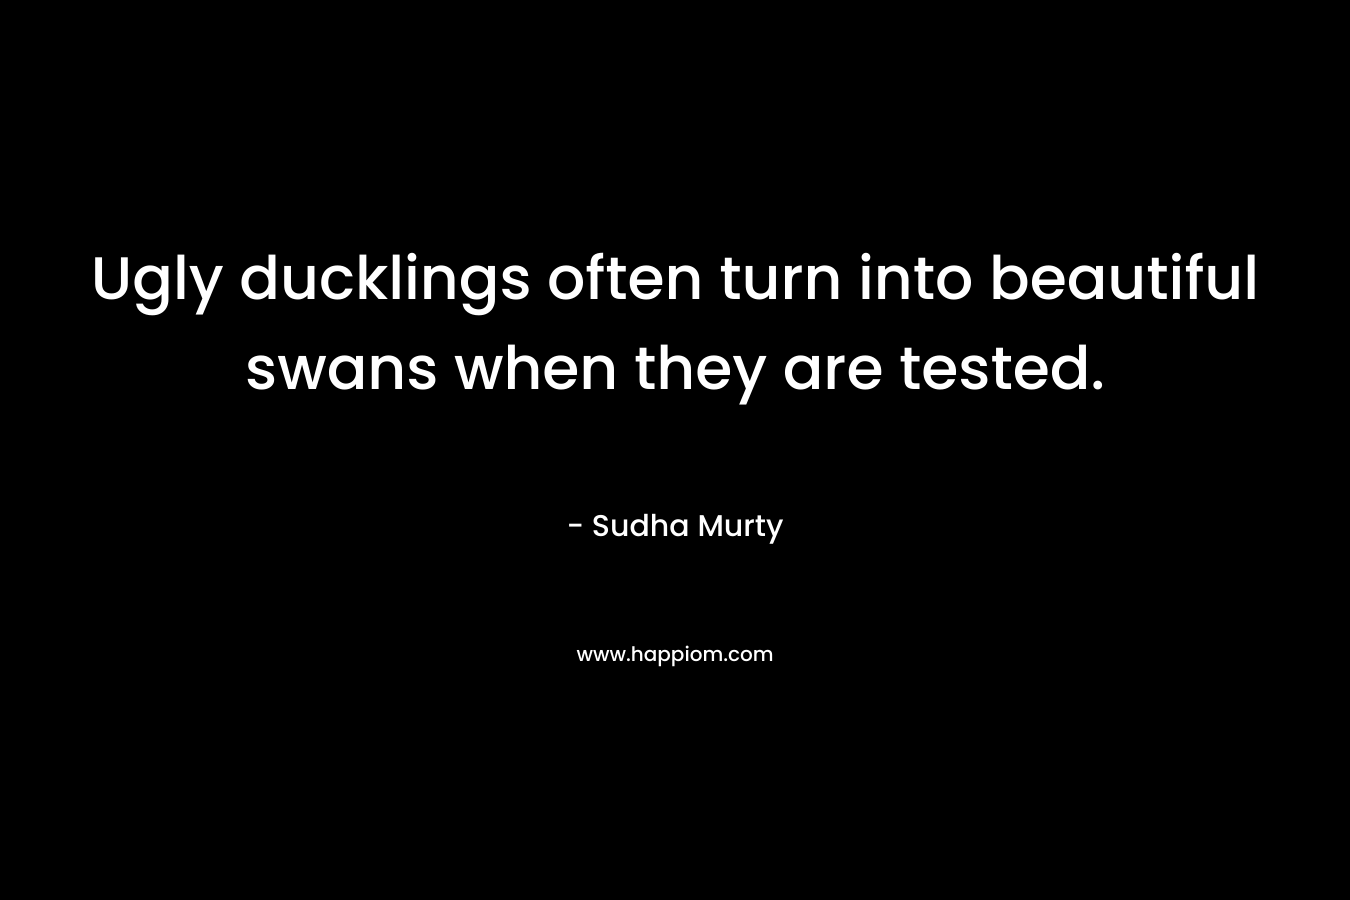 Ugly ducklings often turn into beautiful swans when they are tested. – Sudha Murty